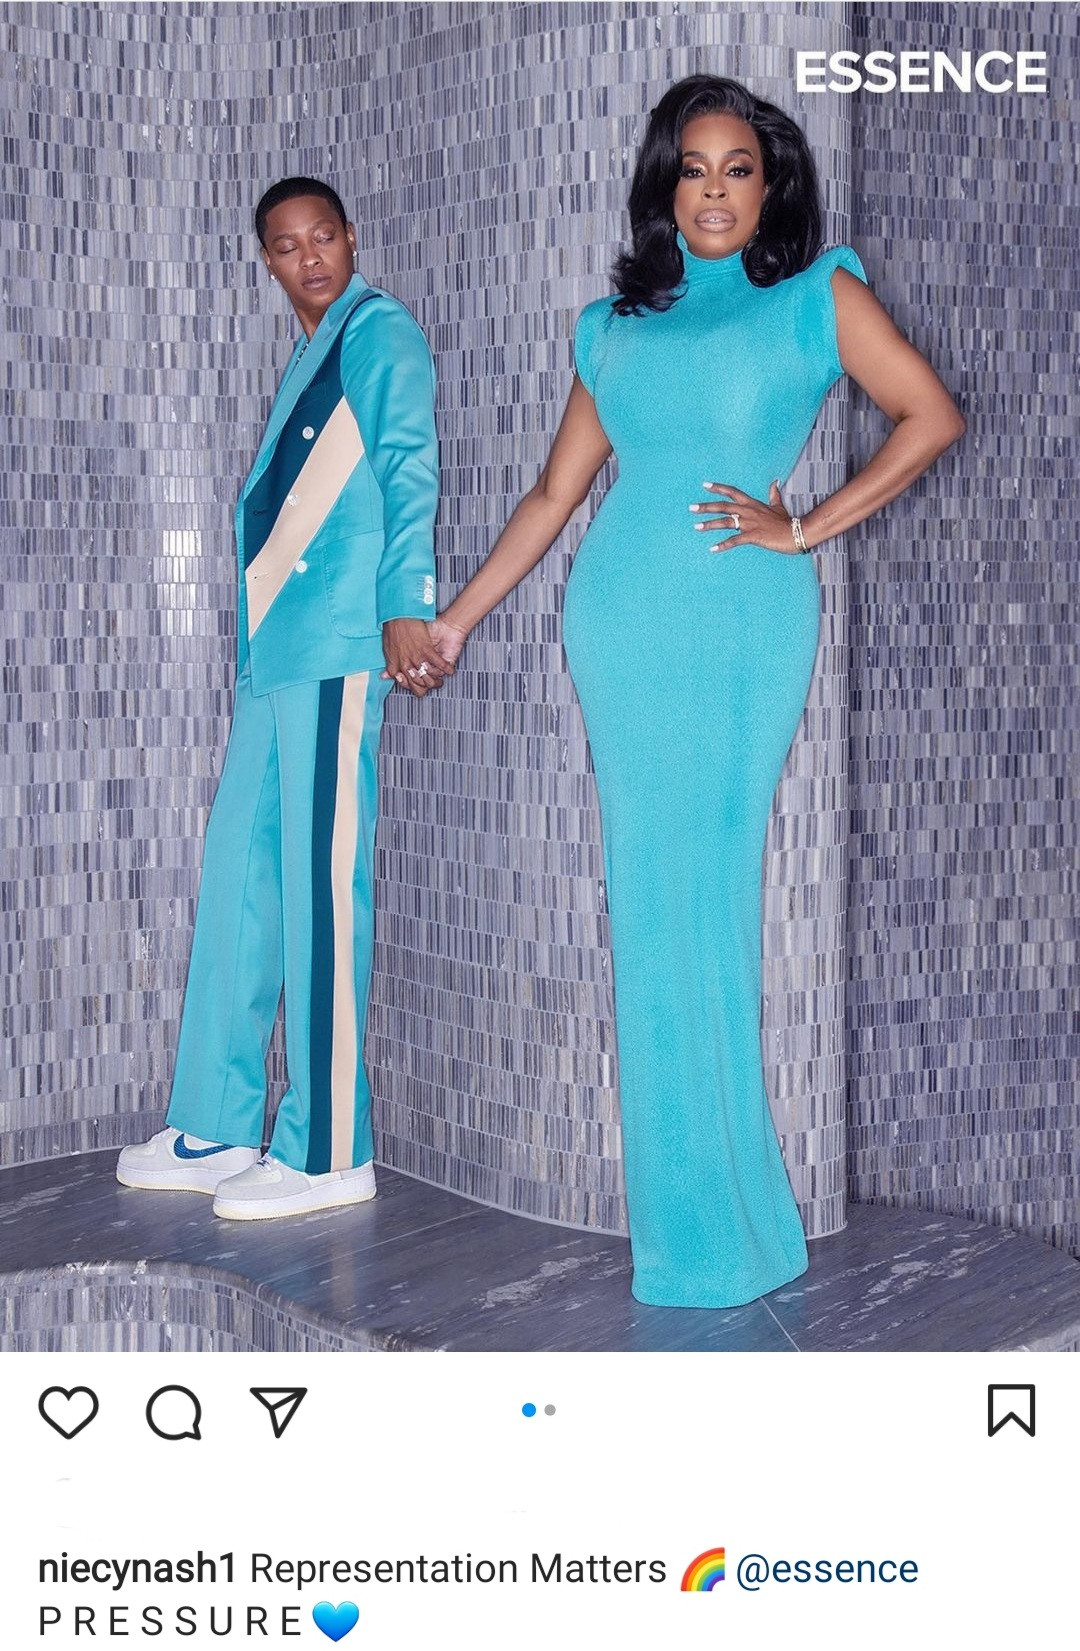 Niecy Nash and partner Jessica Betts make history as first queer couple on Essence cover